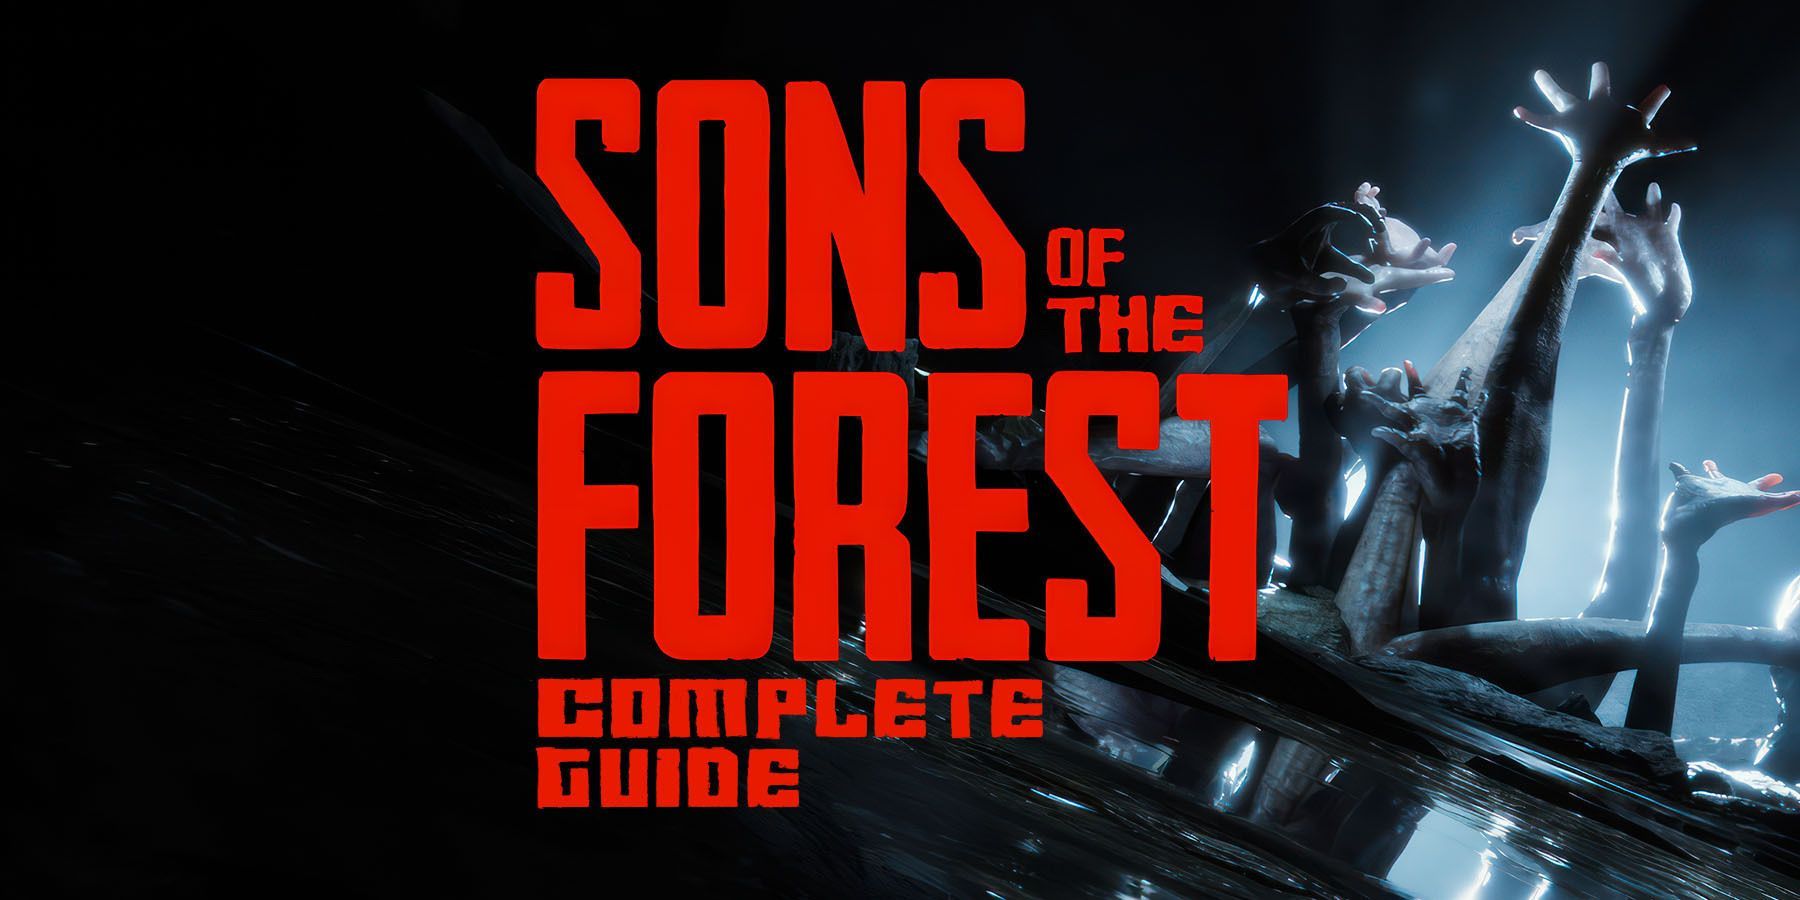 Sons of the Forest Starter Guide